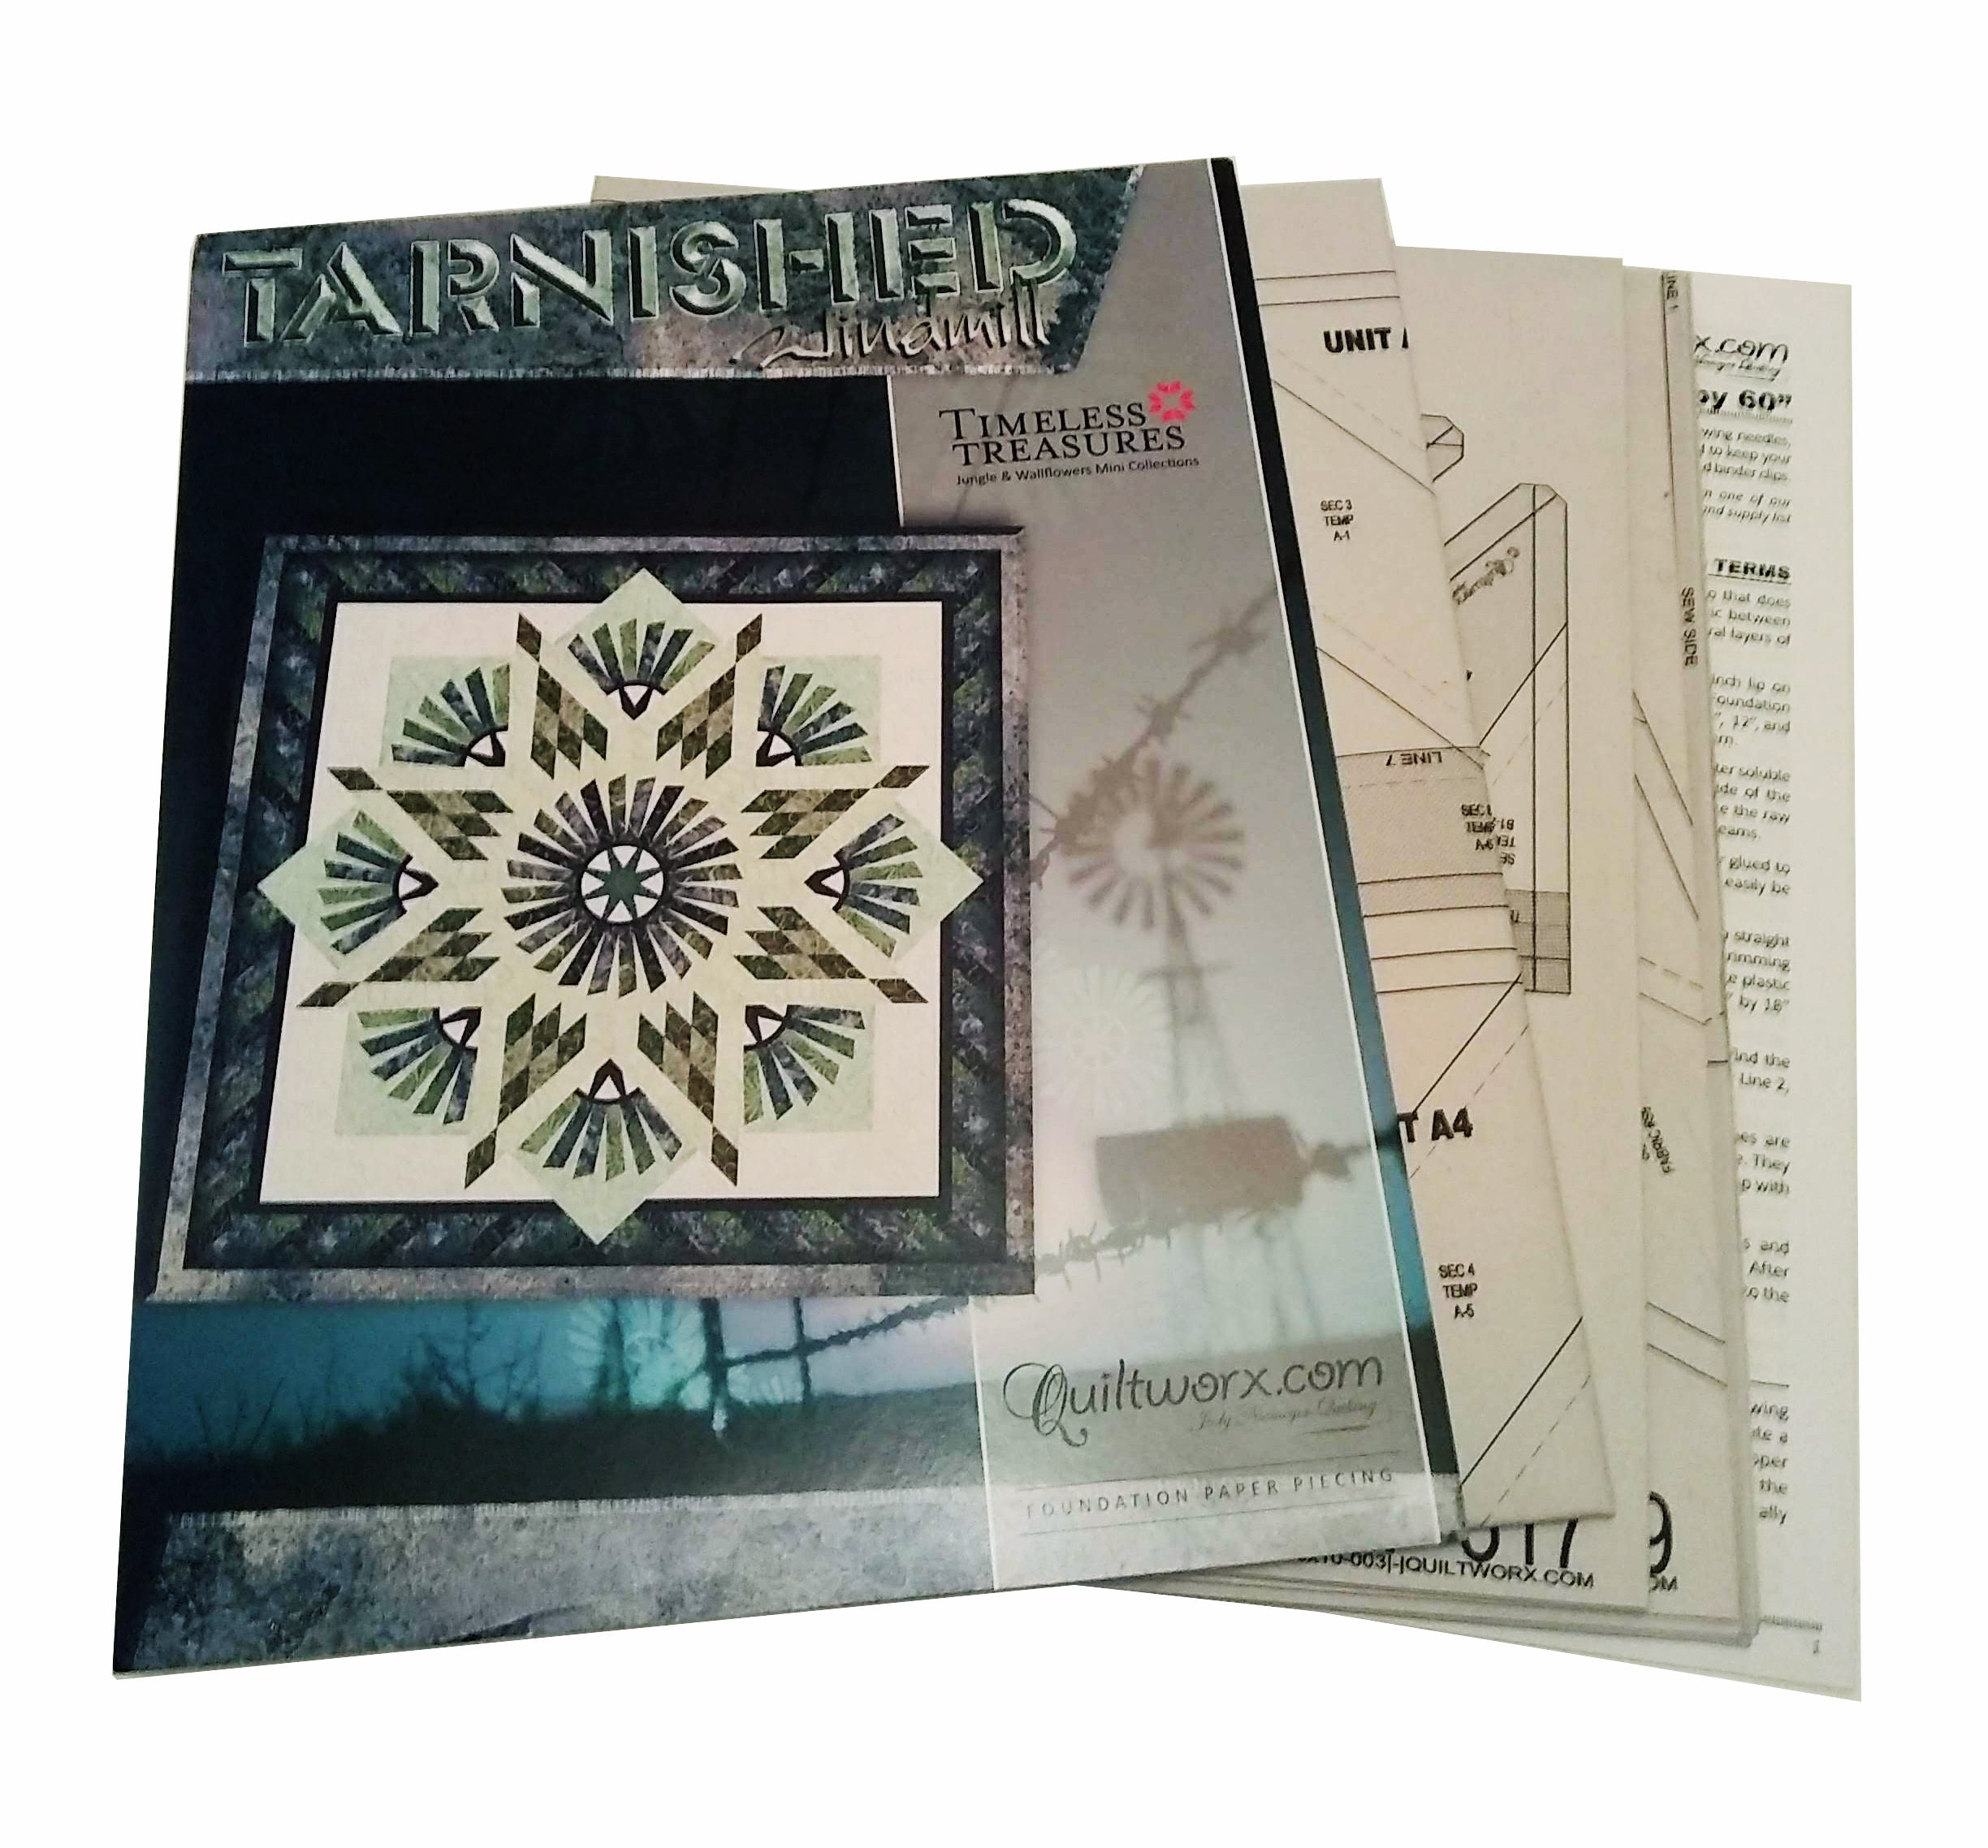 Jen Kingwell Acrylic Template Set - Diamond Exchange (FOR Use with A Pattern Found in Jen Kingwell's Quilt Recipes Book)